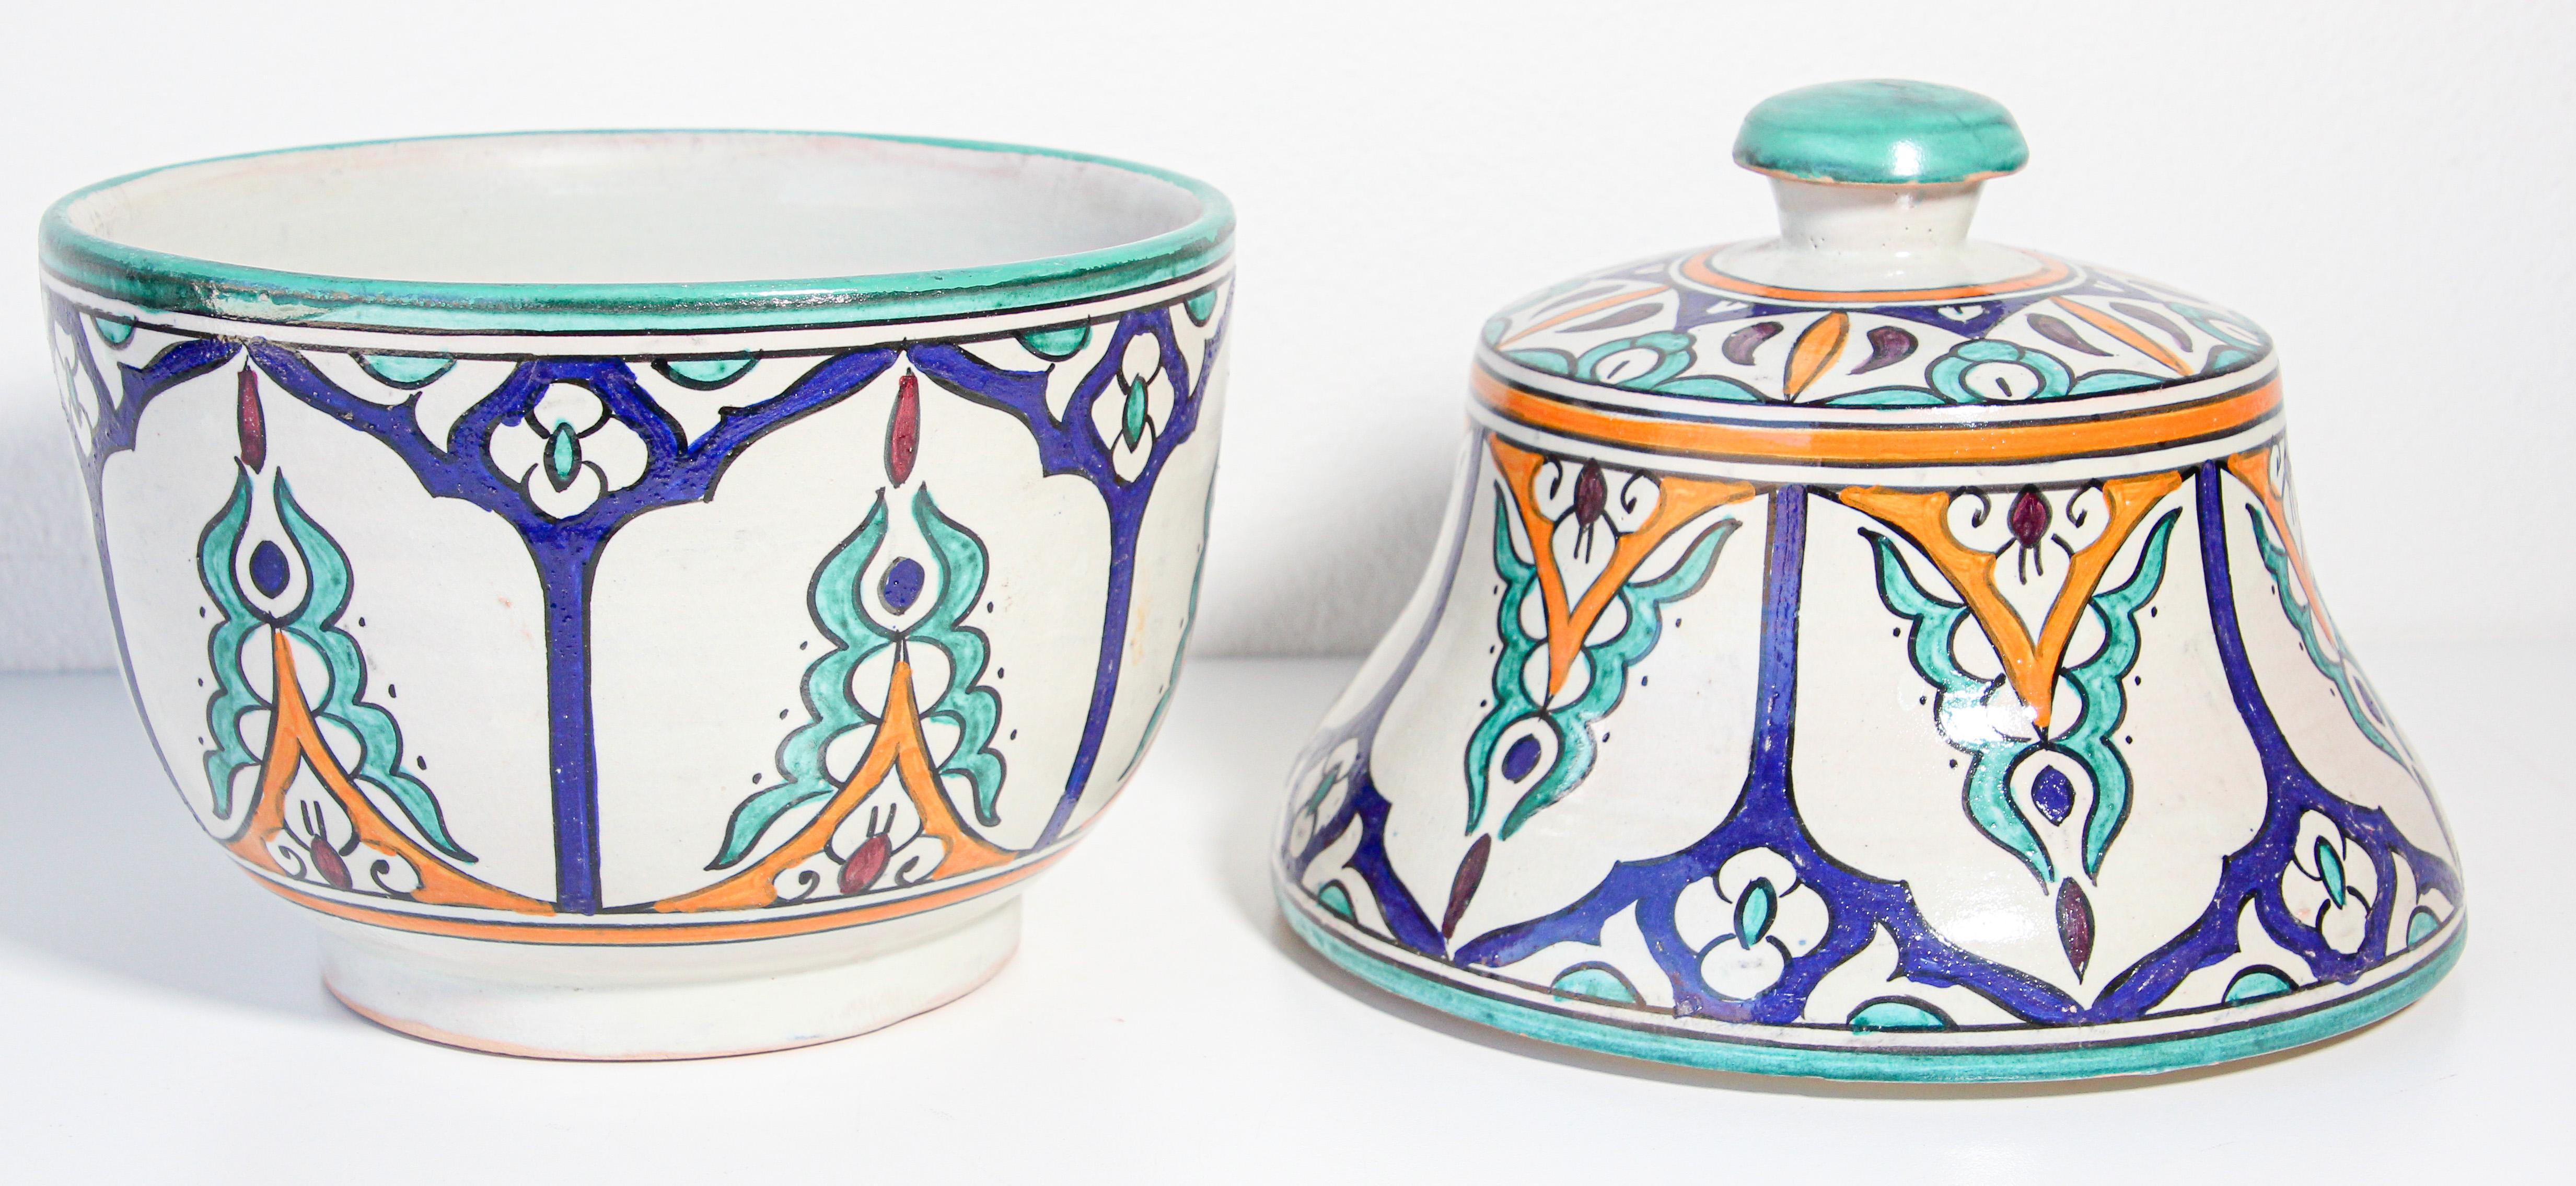 Hand-Crafted Moorish Ceramic Glazed Covered Jars Handcrafted in Fez Morocco For Sale